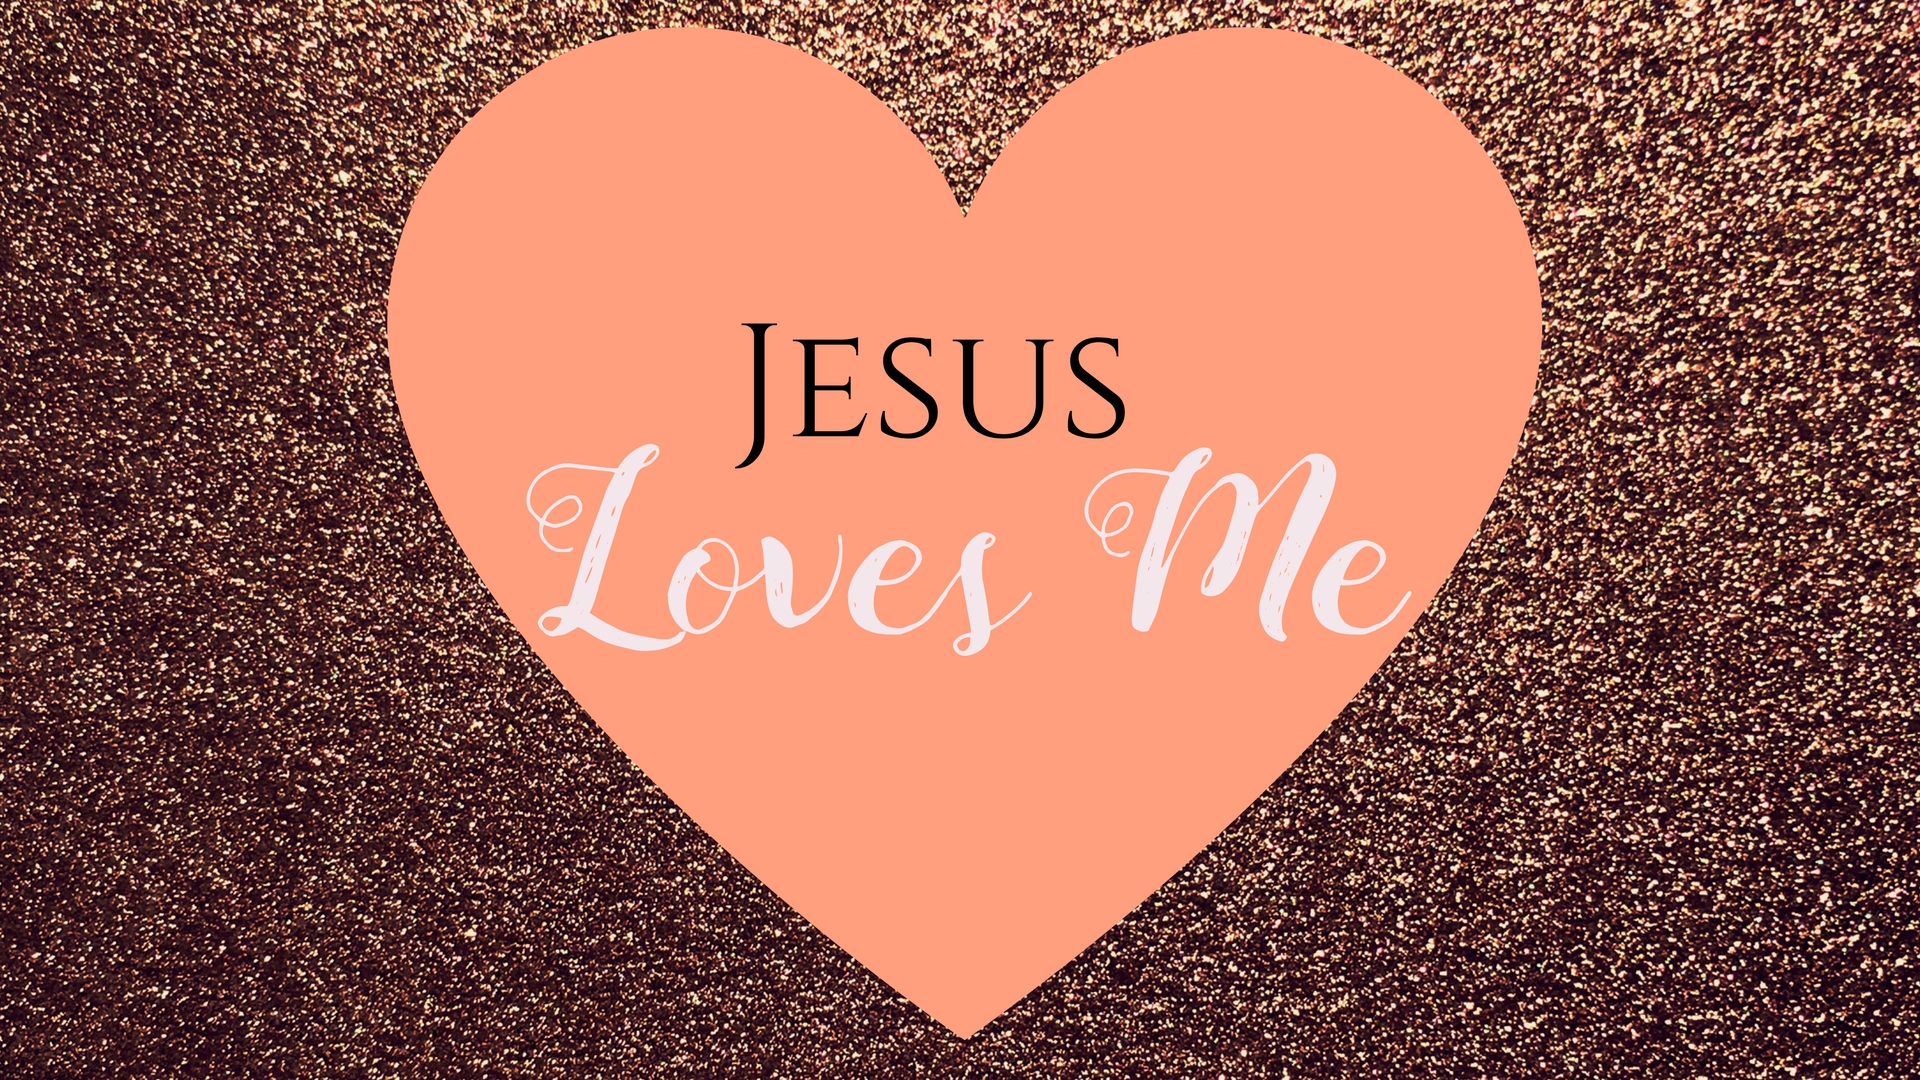 Jsus Loves You Christian Wallpaper Photo And Screensaver For Mobile Iphone  And Desktop - God HD Wallpapers